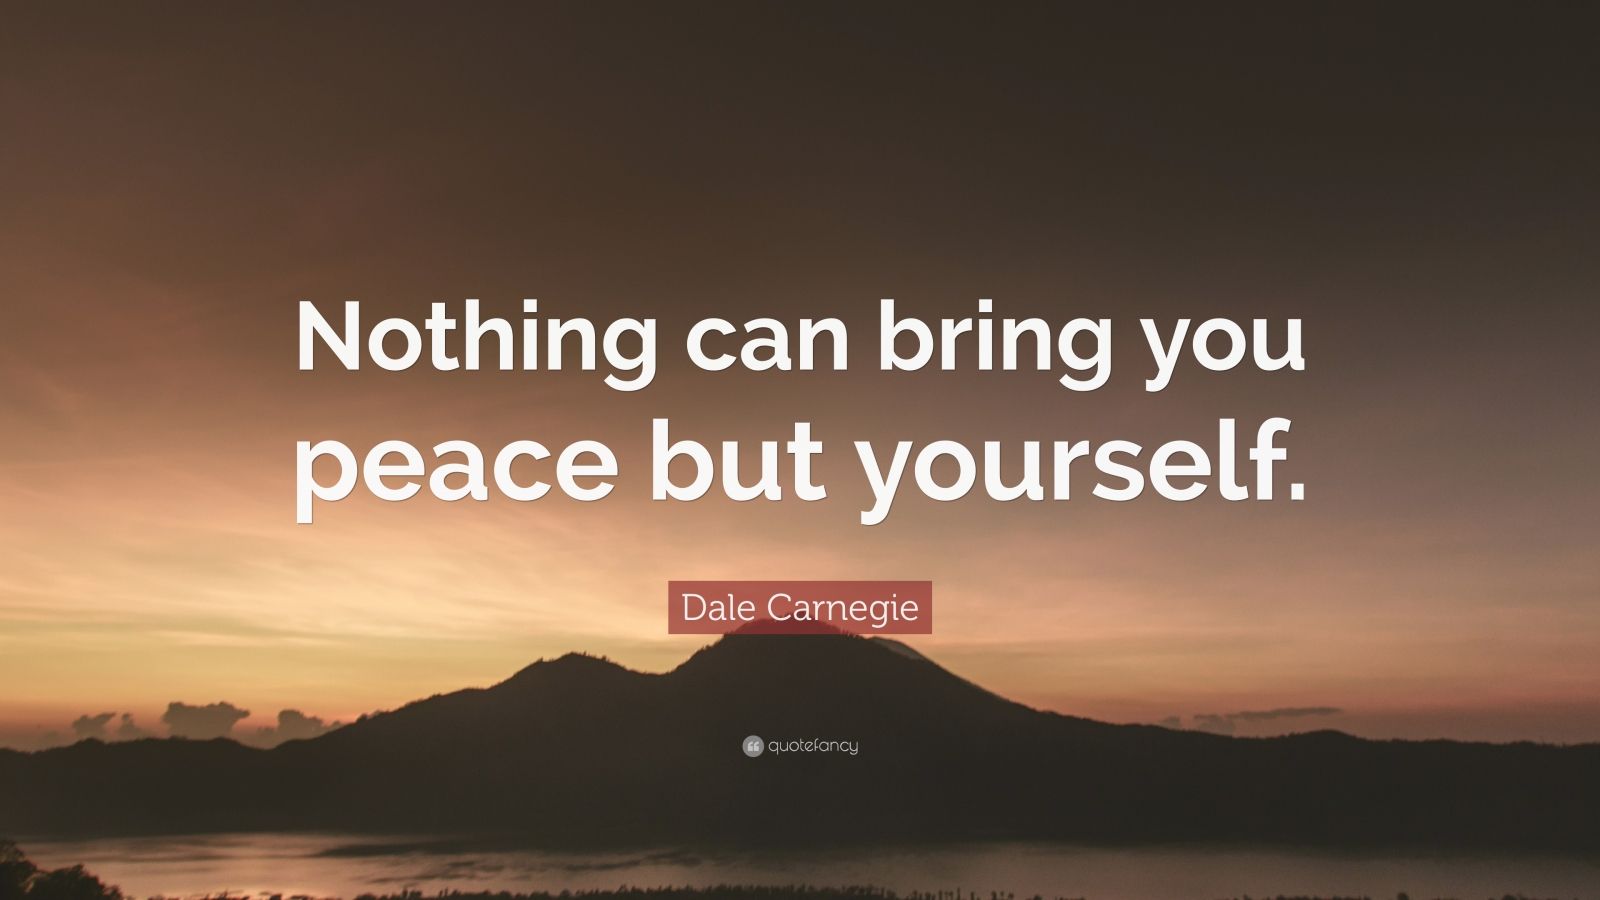 essay about nothing can bring you peace but yourself